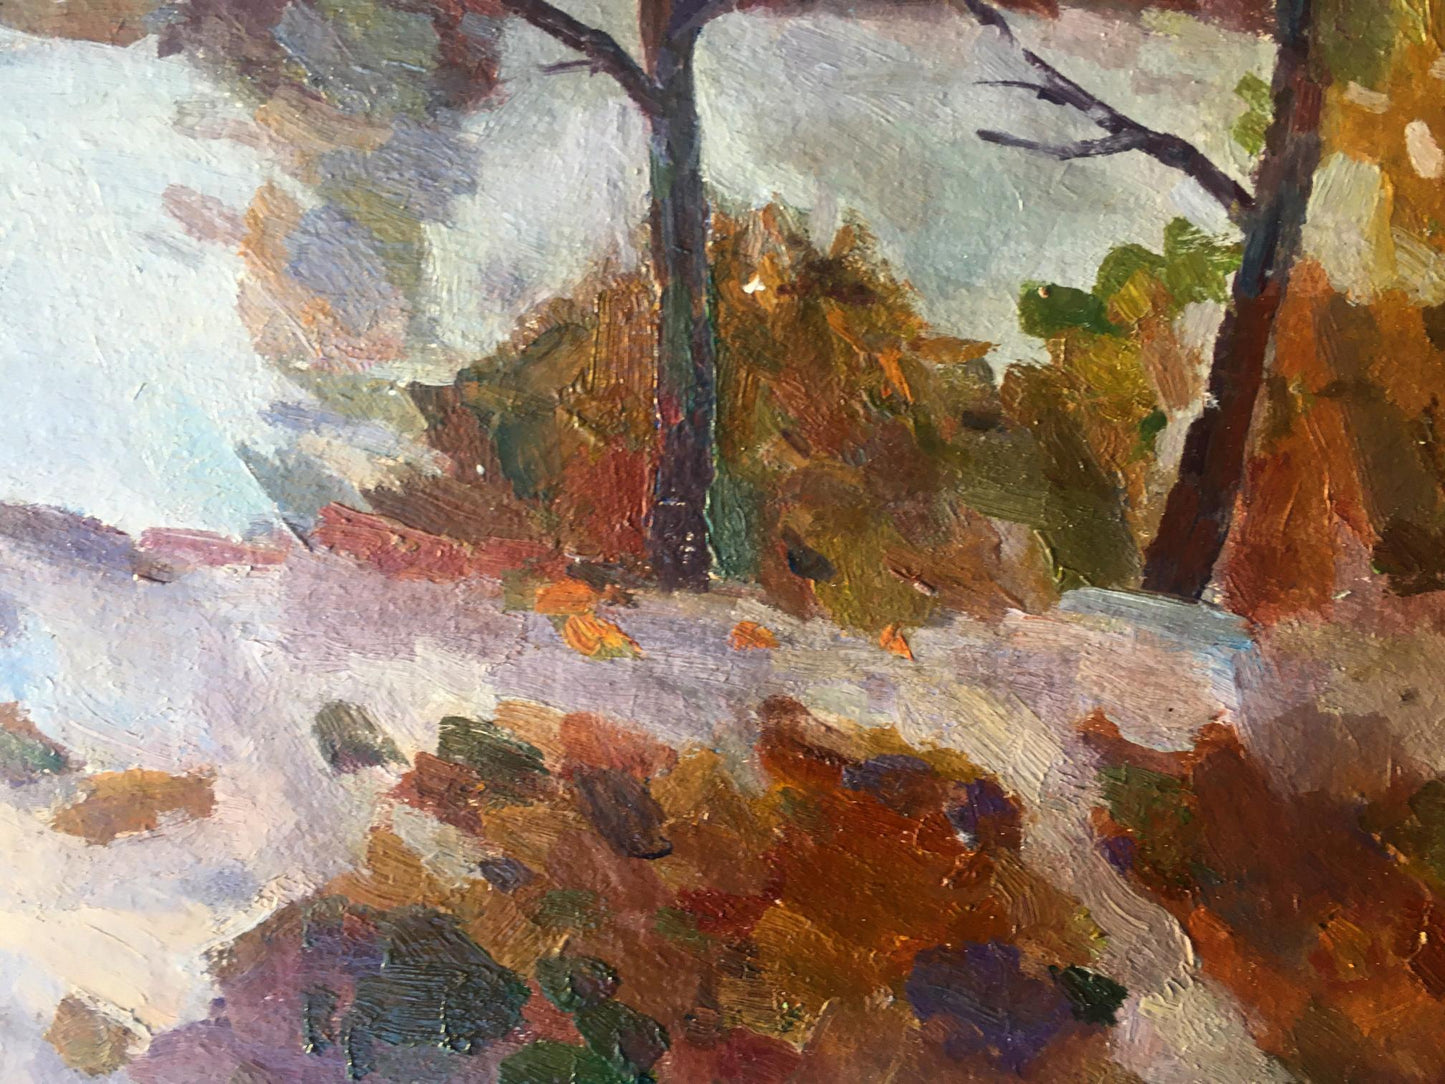 Through his oil artwork, Dobrev invites us to explore the peaceful ambiance of a forest brook